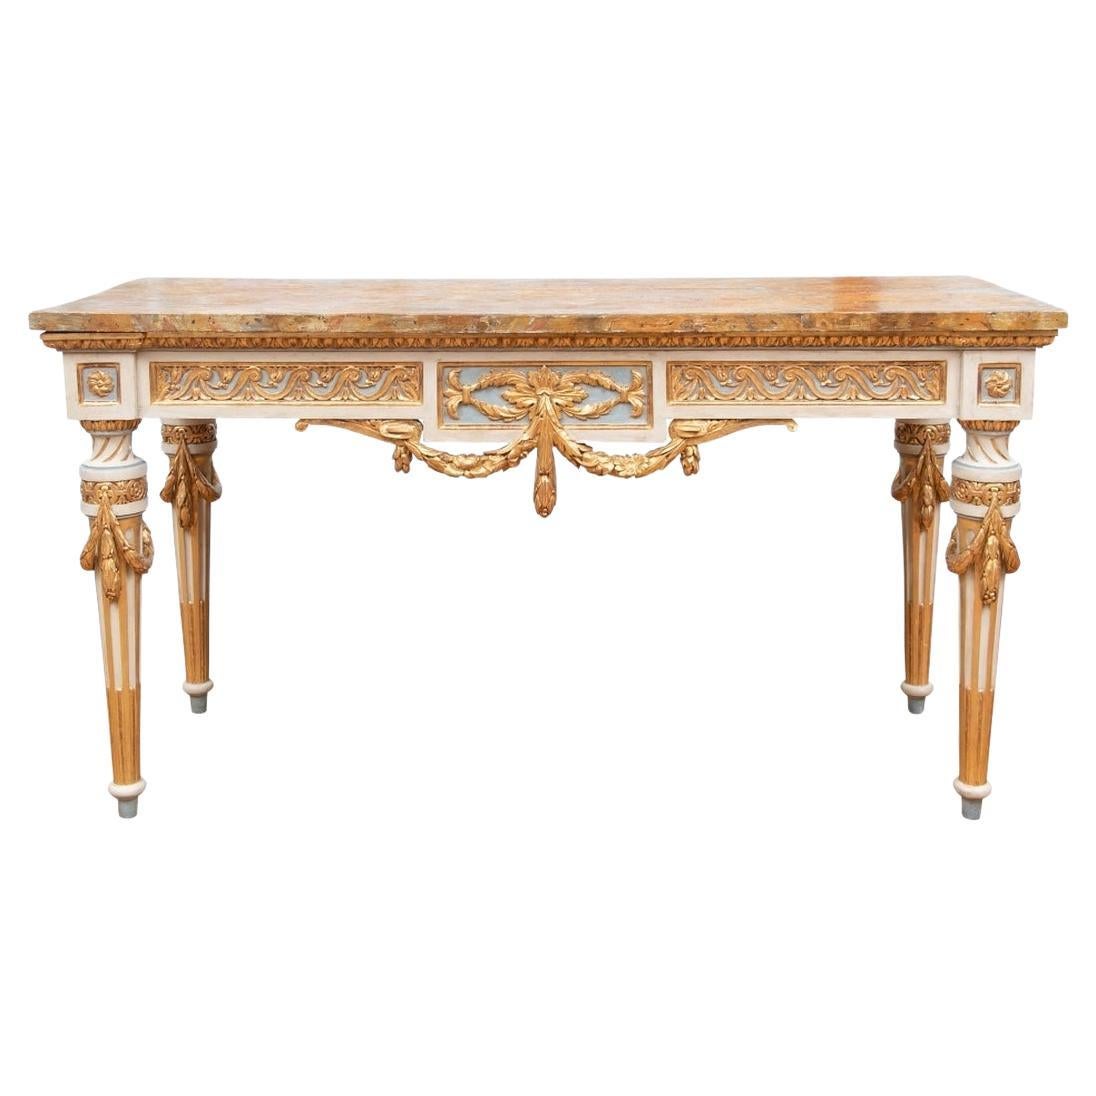 Extraordinary French Style Carved, Gilt And Paint Decorated Console For Sale